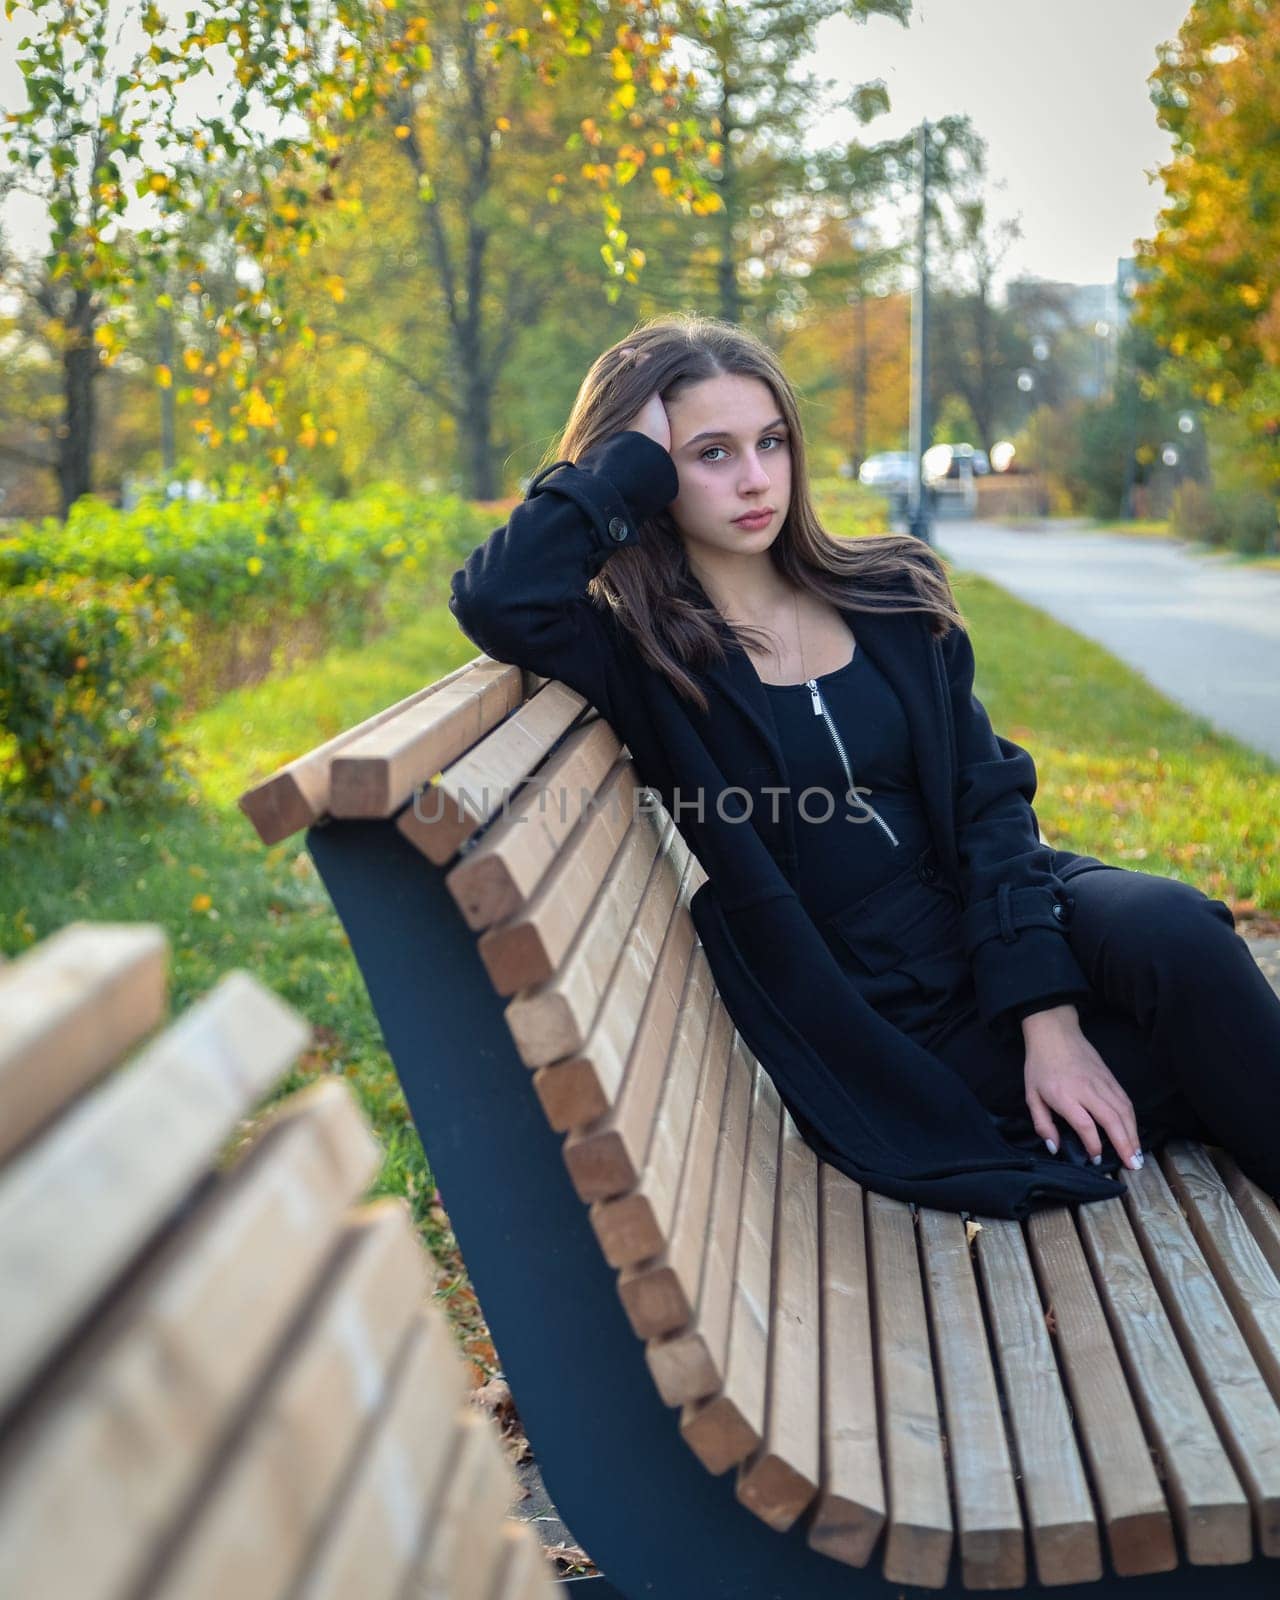 A beautiful girl posing on a bench in an autumn park. by Yurich32